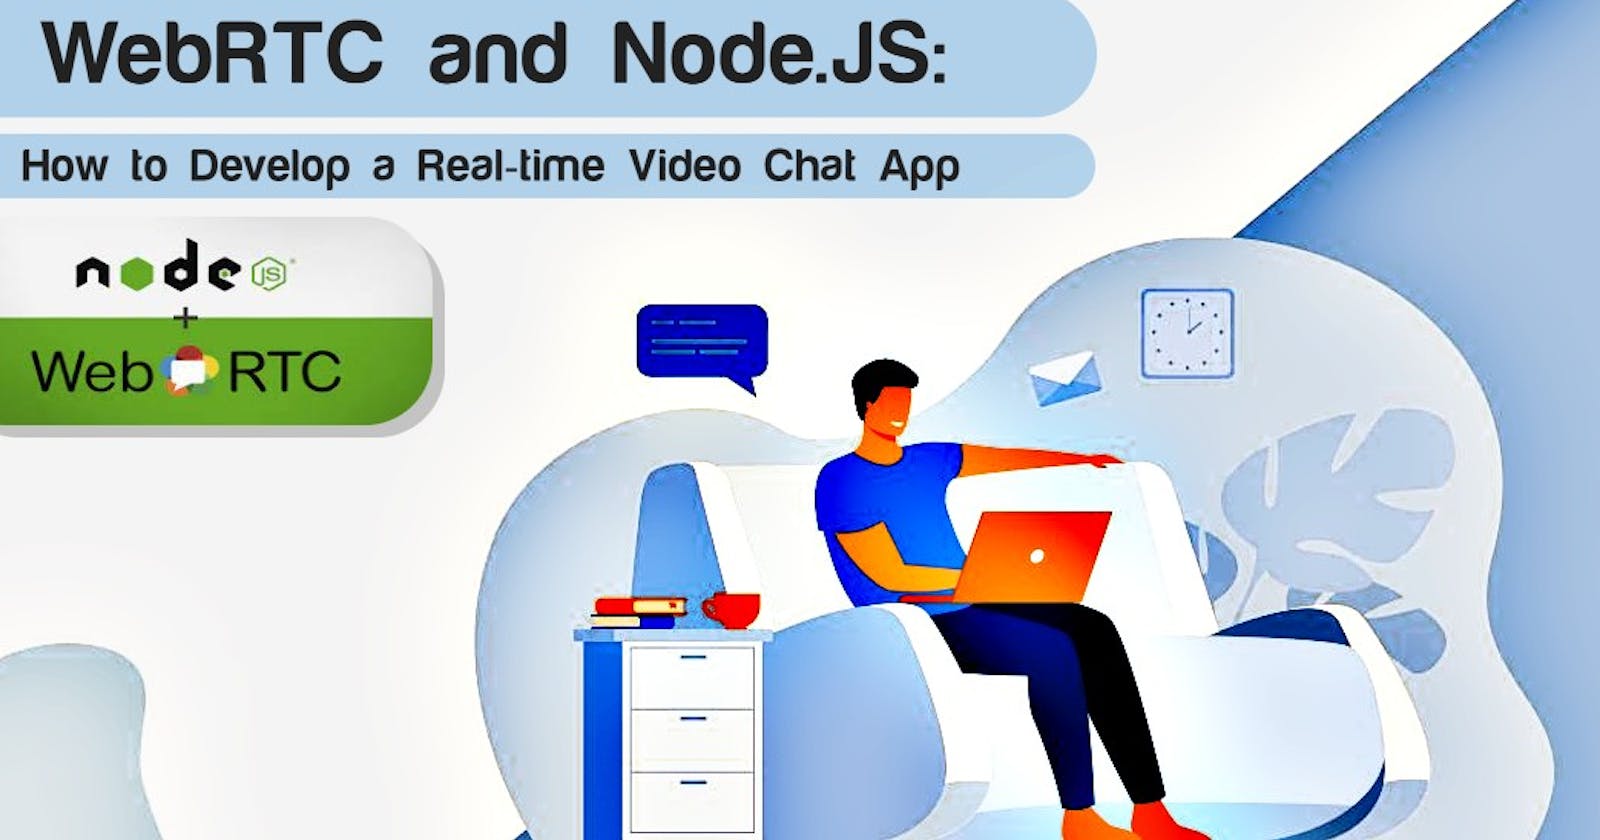 WebRTC and Node.JS: How to Develop a Real-time Video Chat App